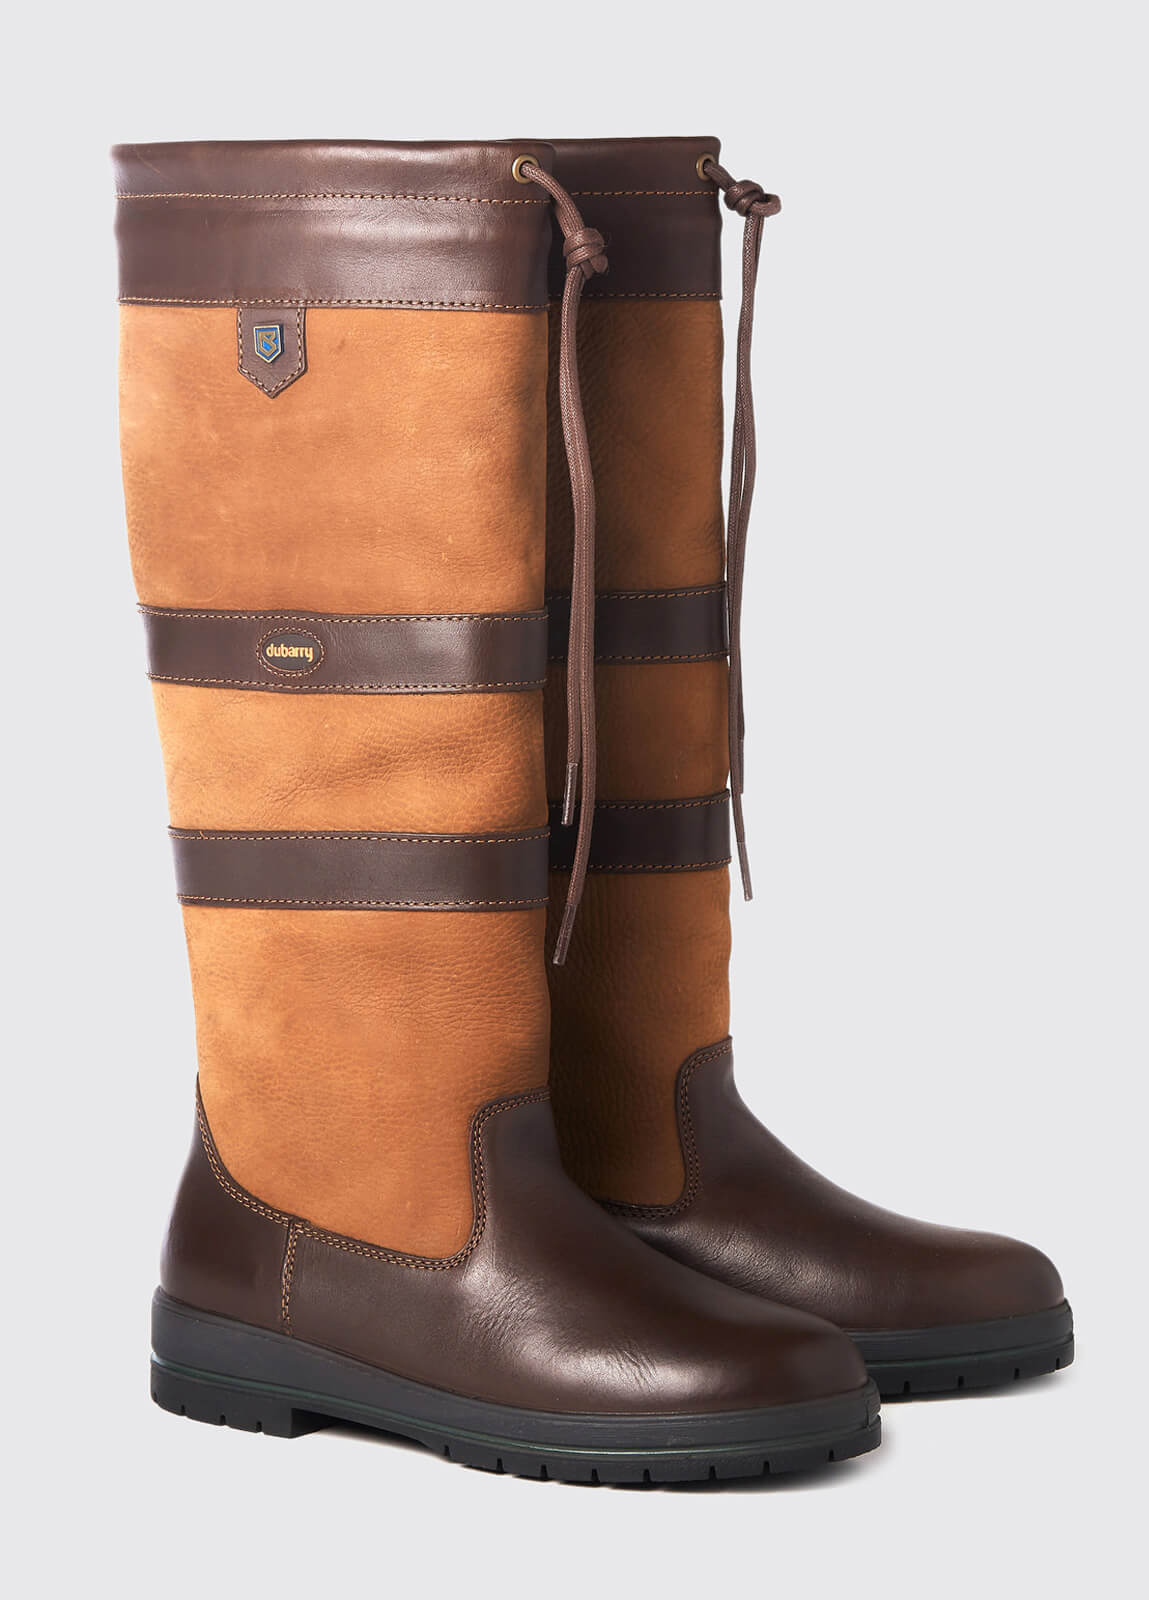 Bourgeon højttaler ligning Dubarry Galway Country Boot in Brown Mahogany – Eric Spencer